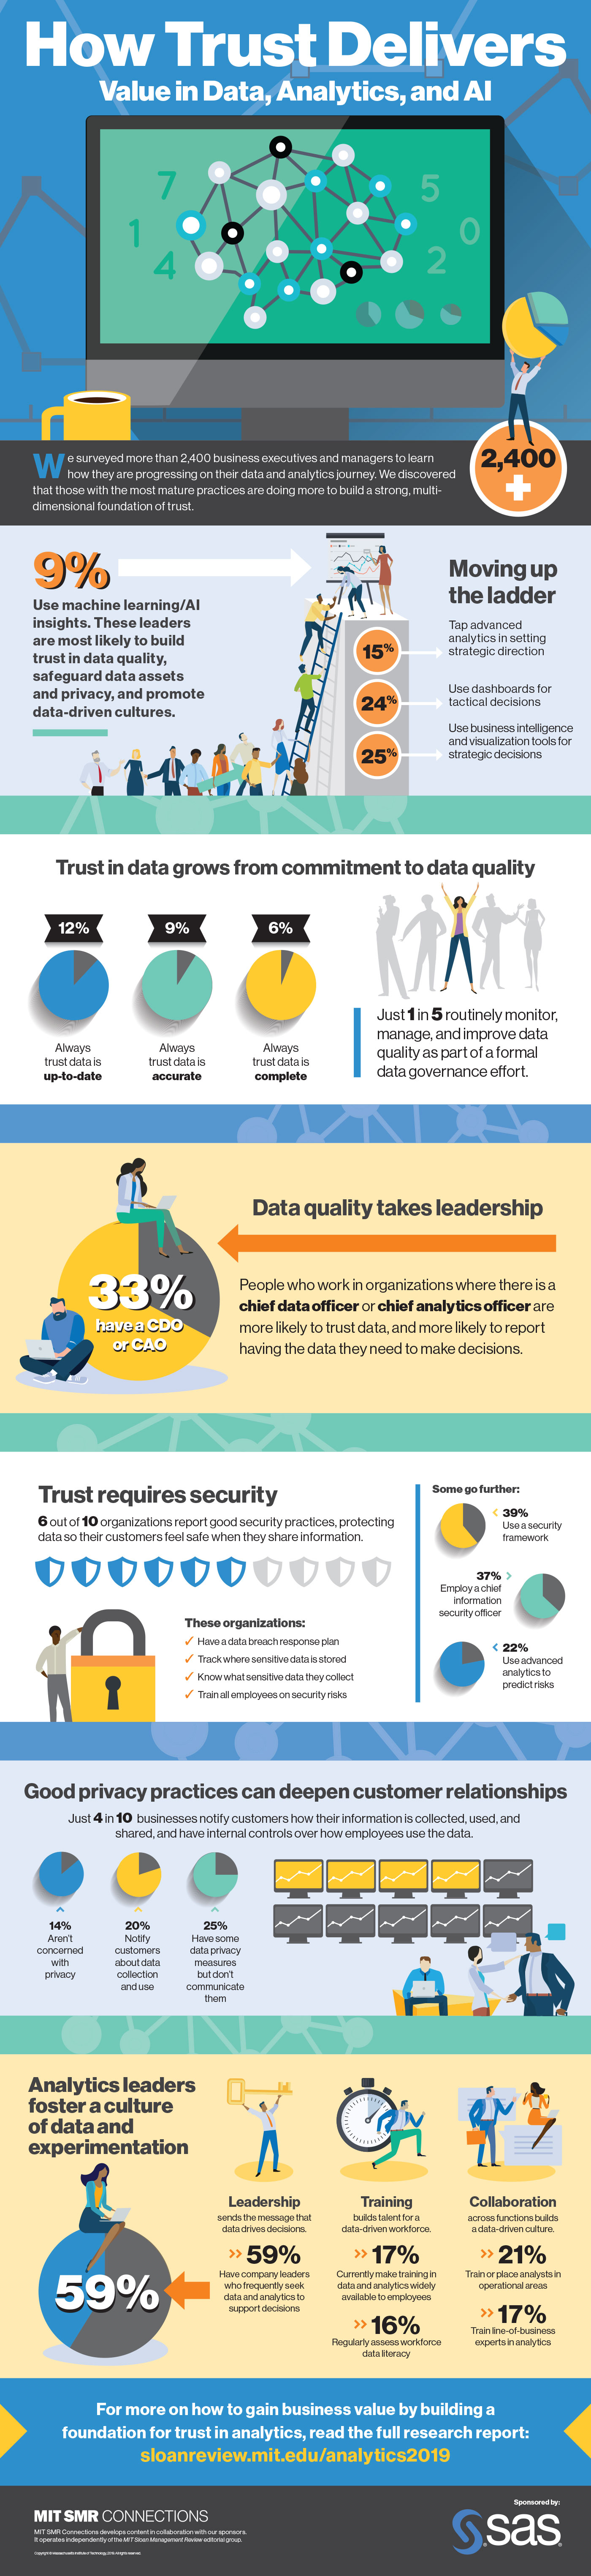 How Trust Delivers Value in Data, Analytics, & AI Infographic